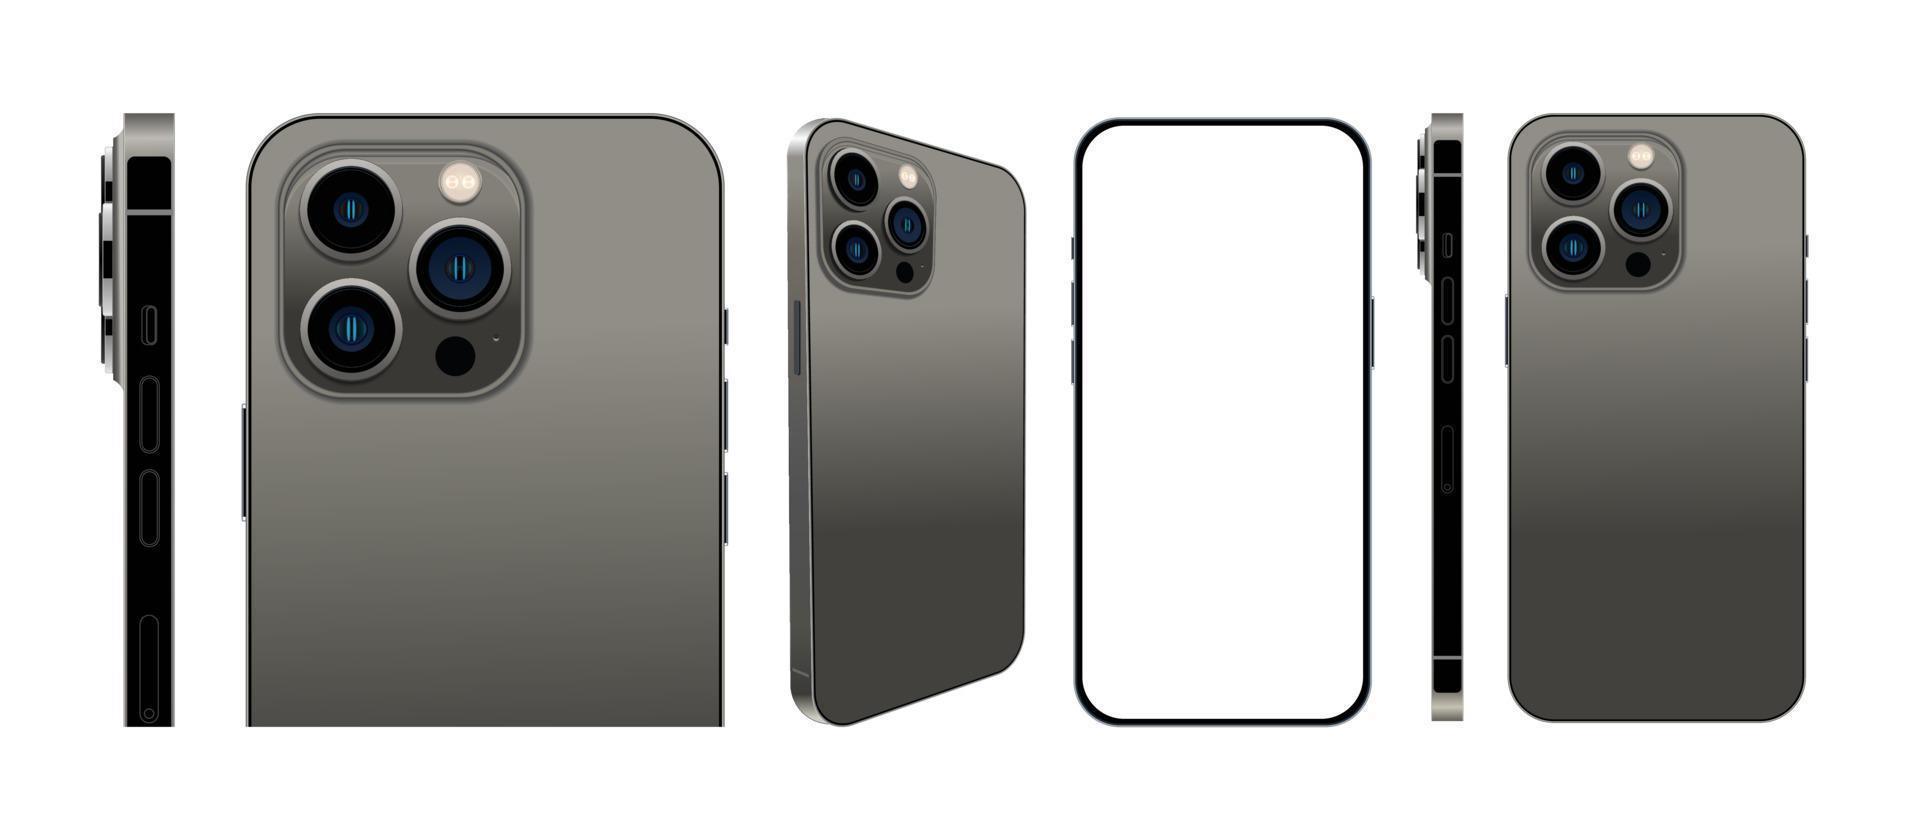 Realistic set of smartphone graphite color layouts isolated on a white background. Vector illustration